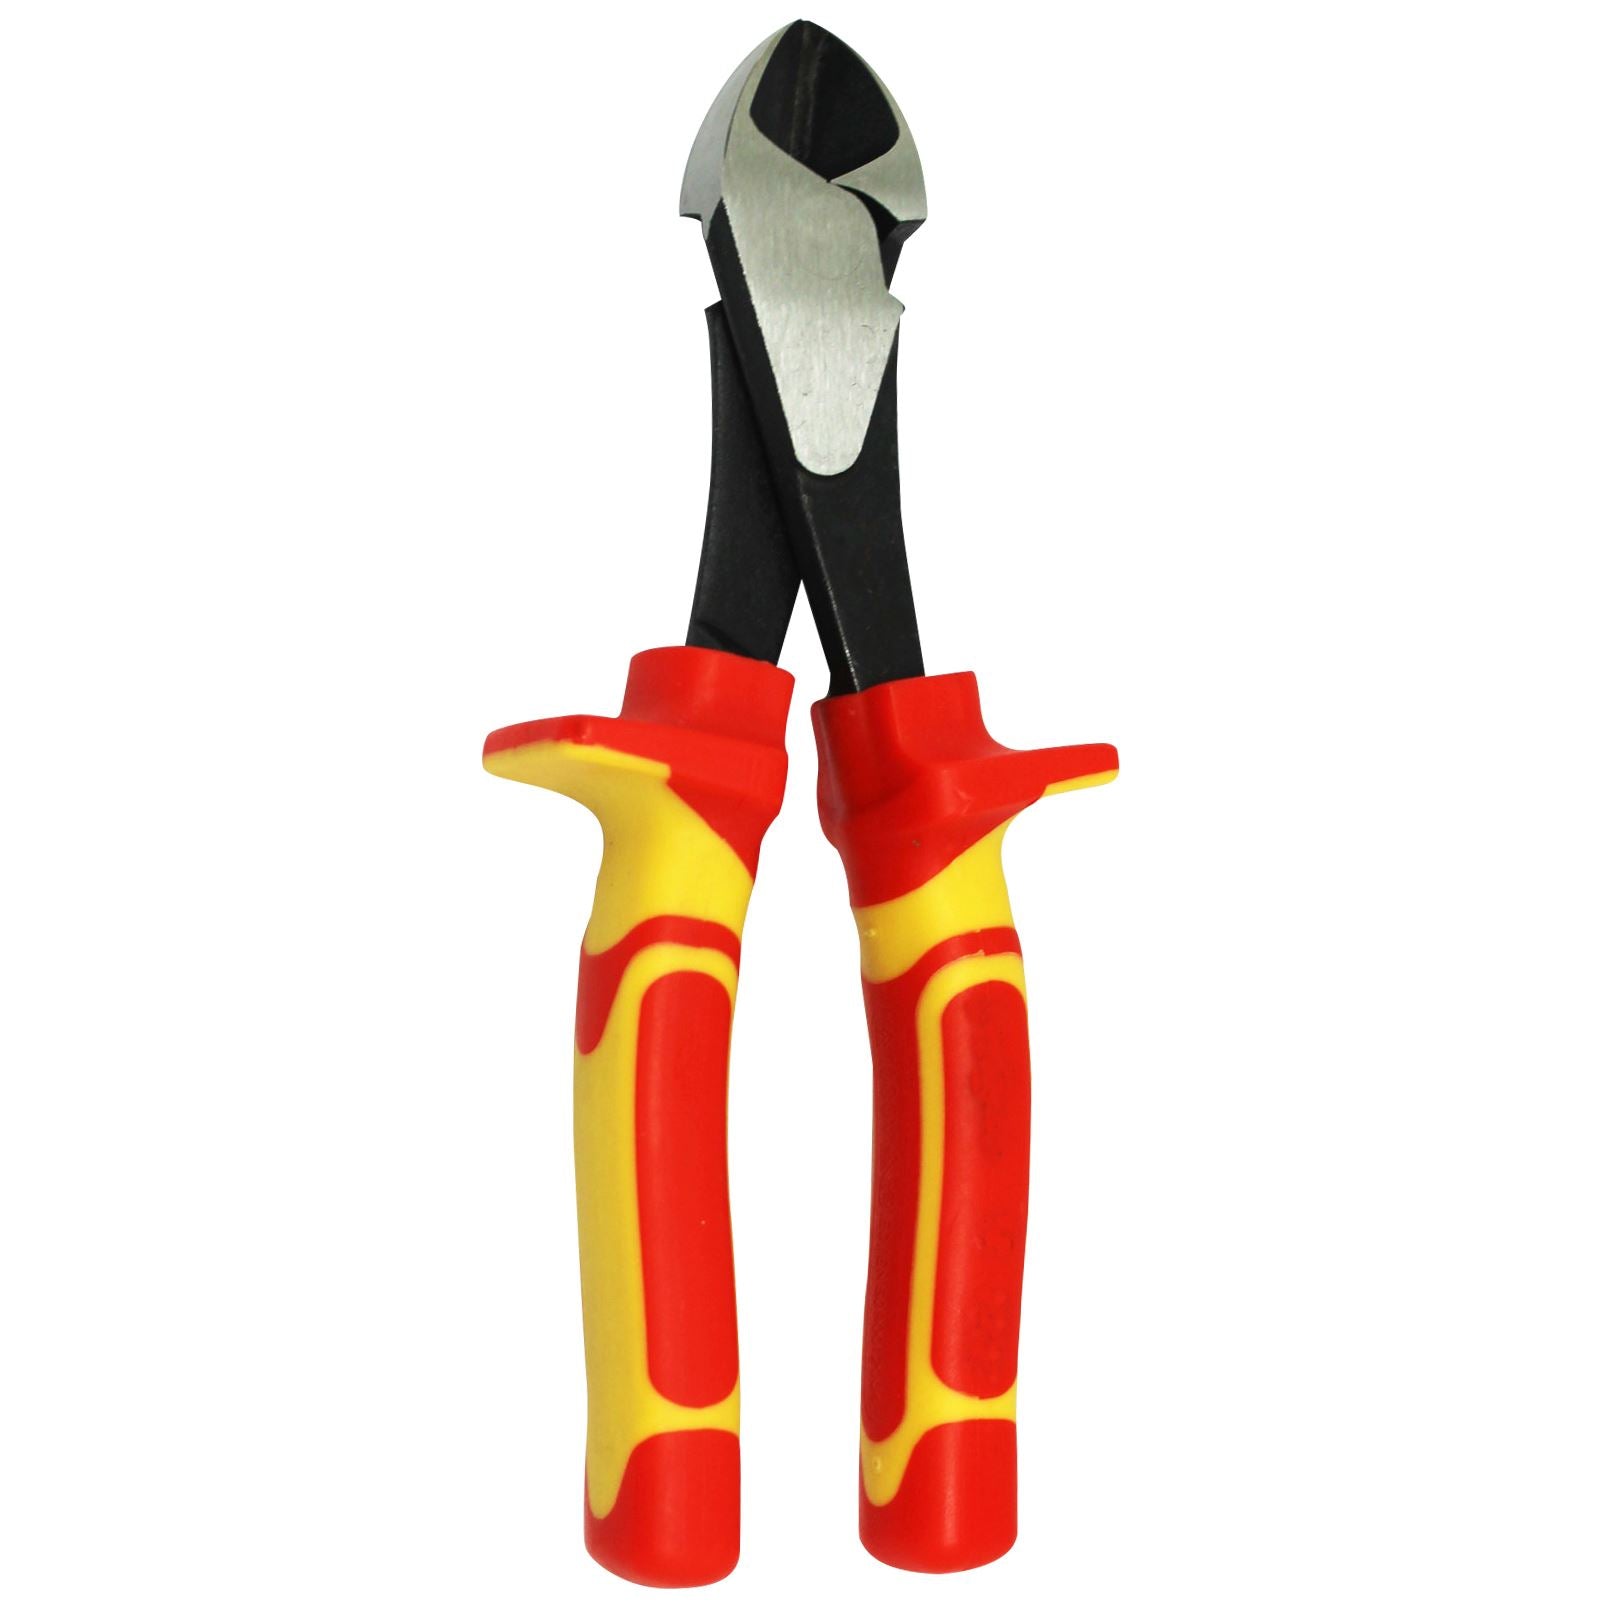 GOLDTOOL_175mm_Insulated_Big_Head_Diagonal_Pliers._Large_Shoulders_to_Protect_Against_Live_Contacts._Rubber_Easy_Grip_Handles_for_Greater_Comfort._Red/Yellow_Colour